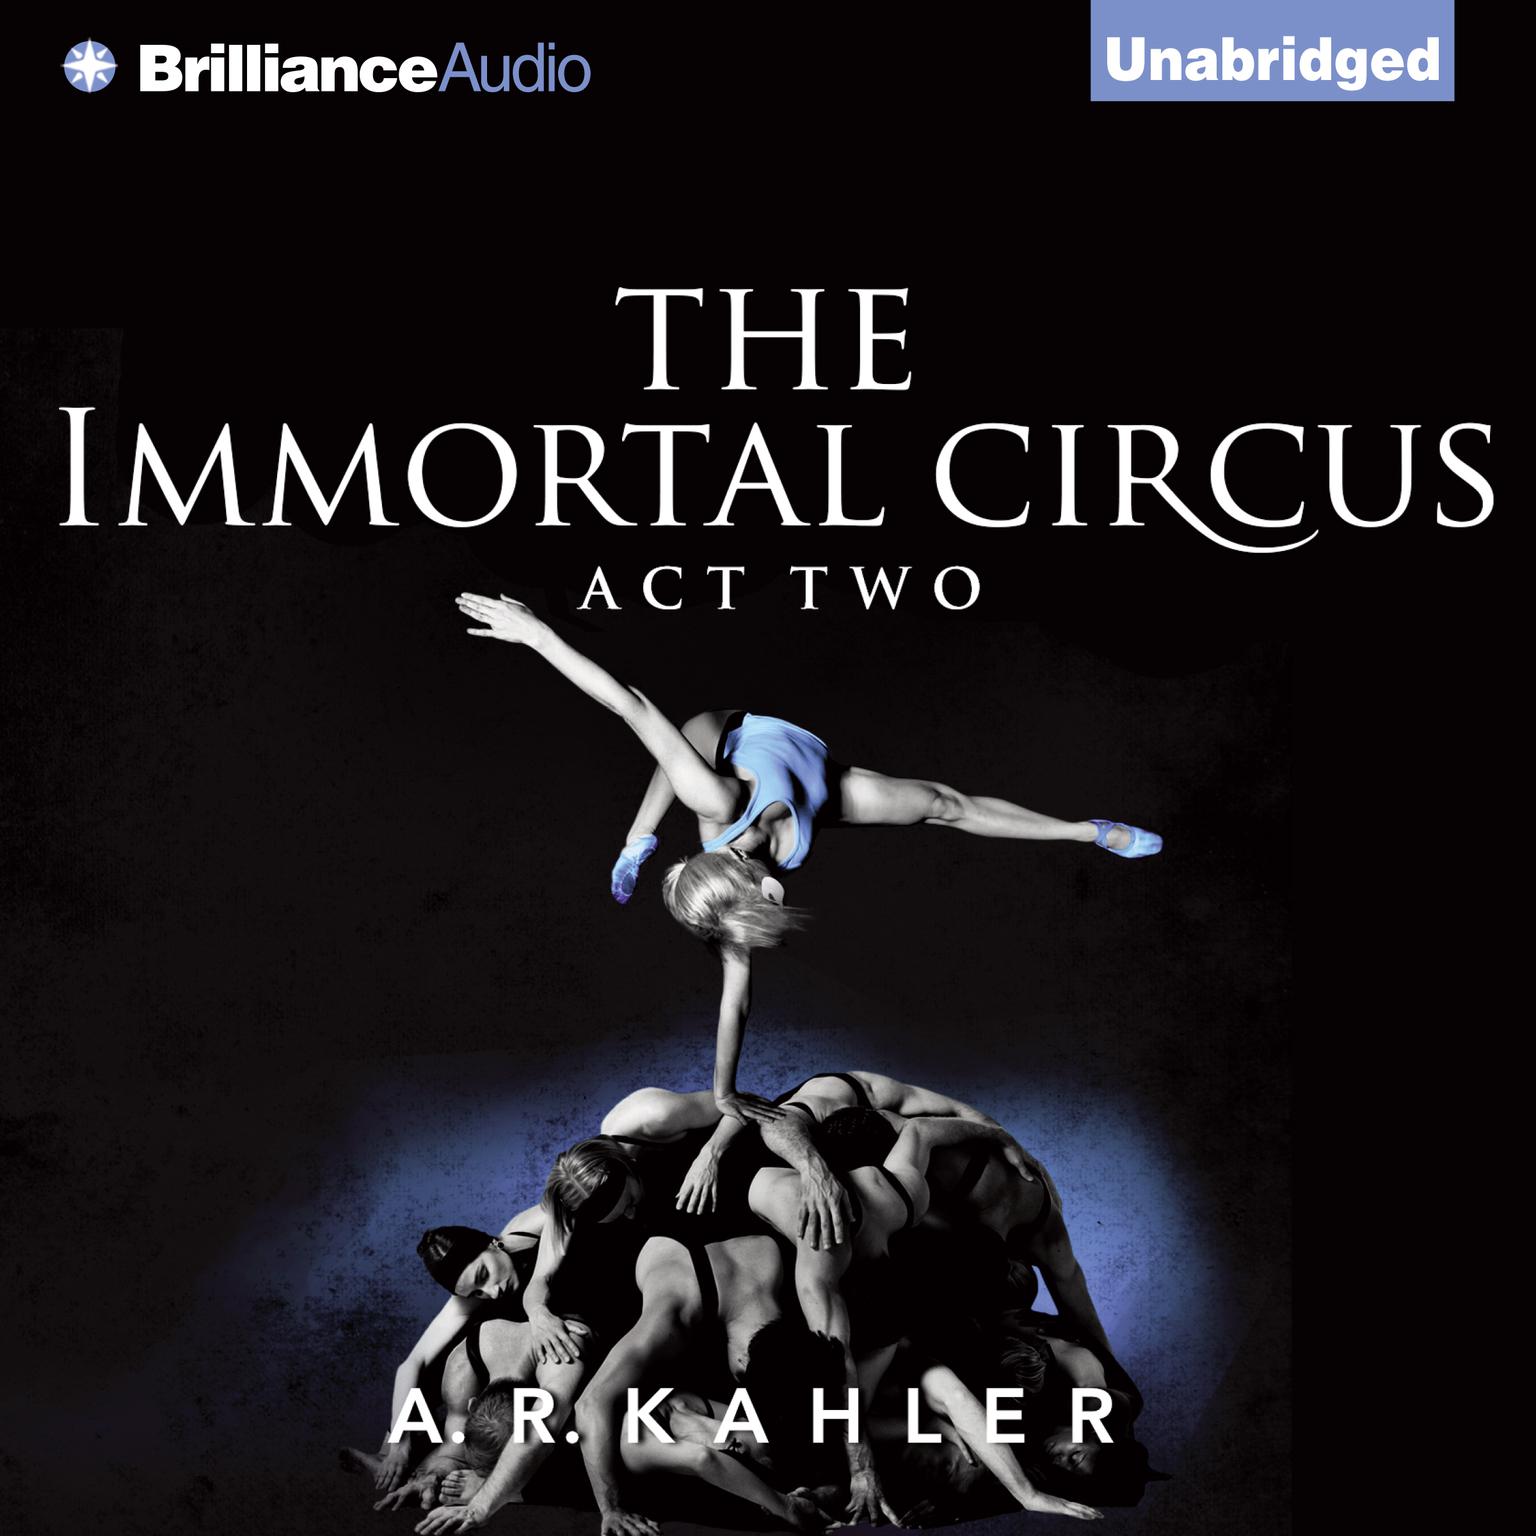 The Immortal Circus: Act Two Audiobook, by A. R. Kahler